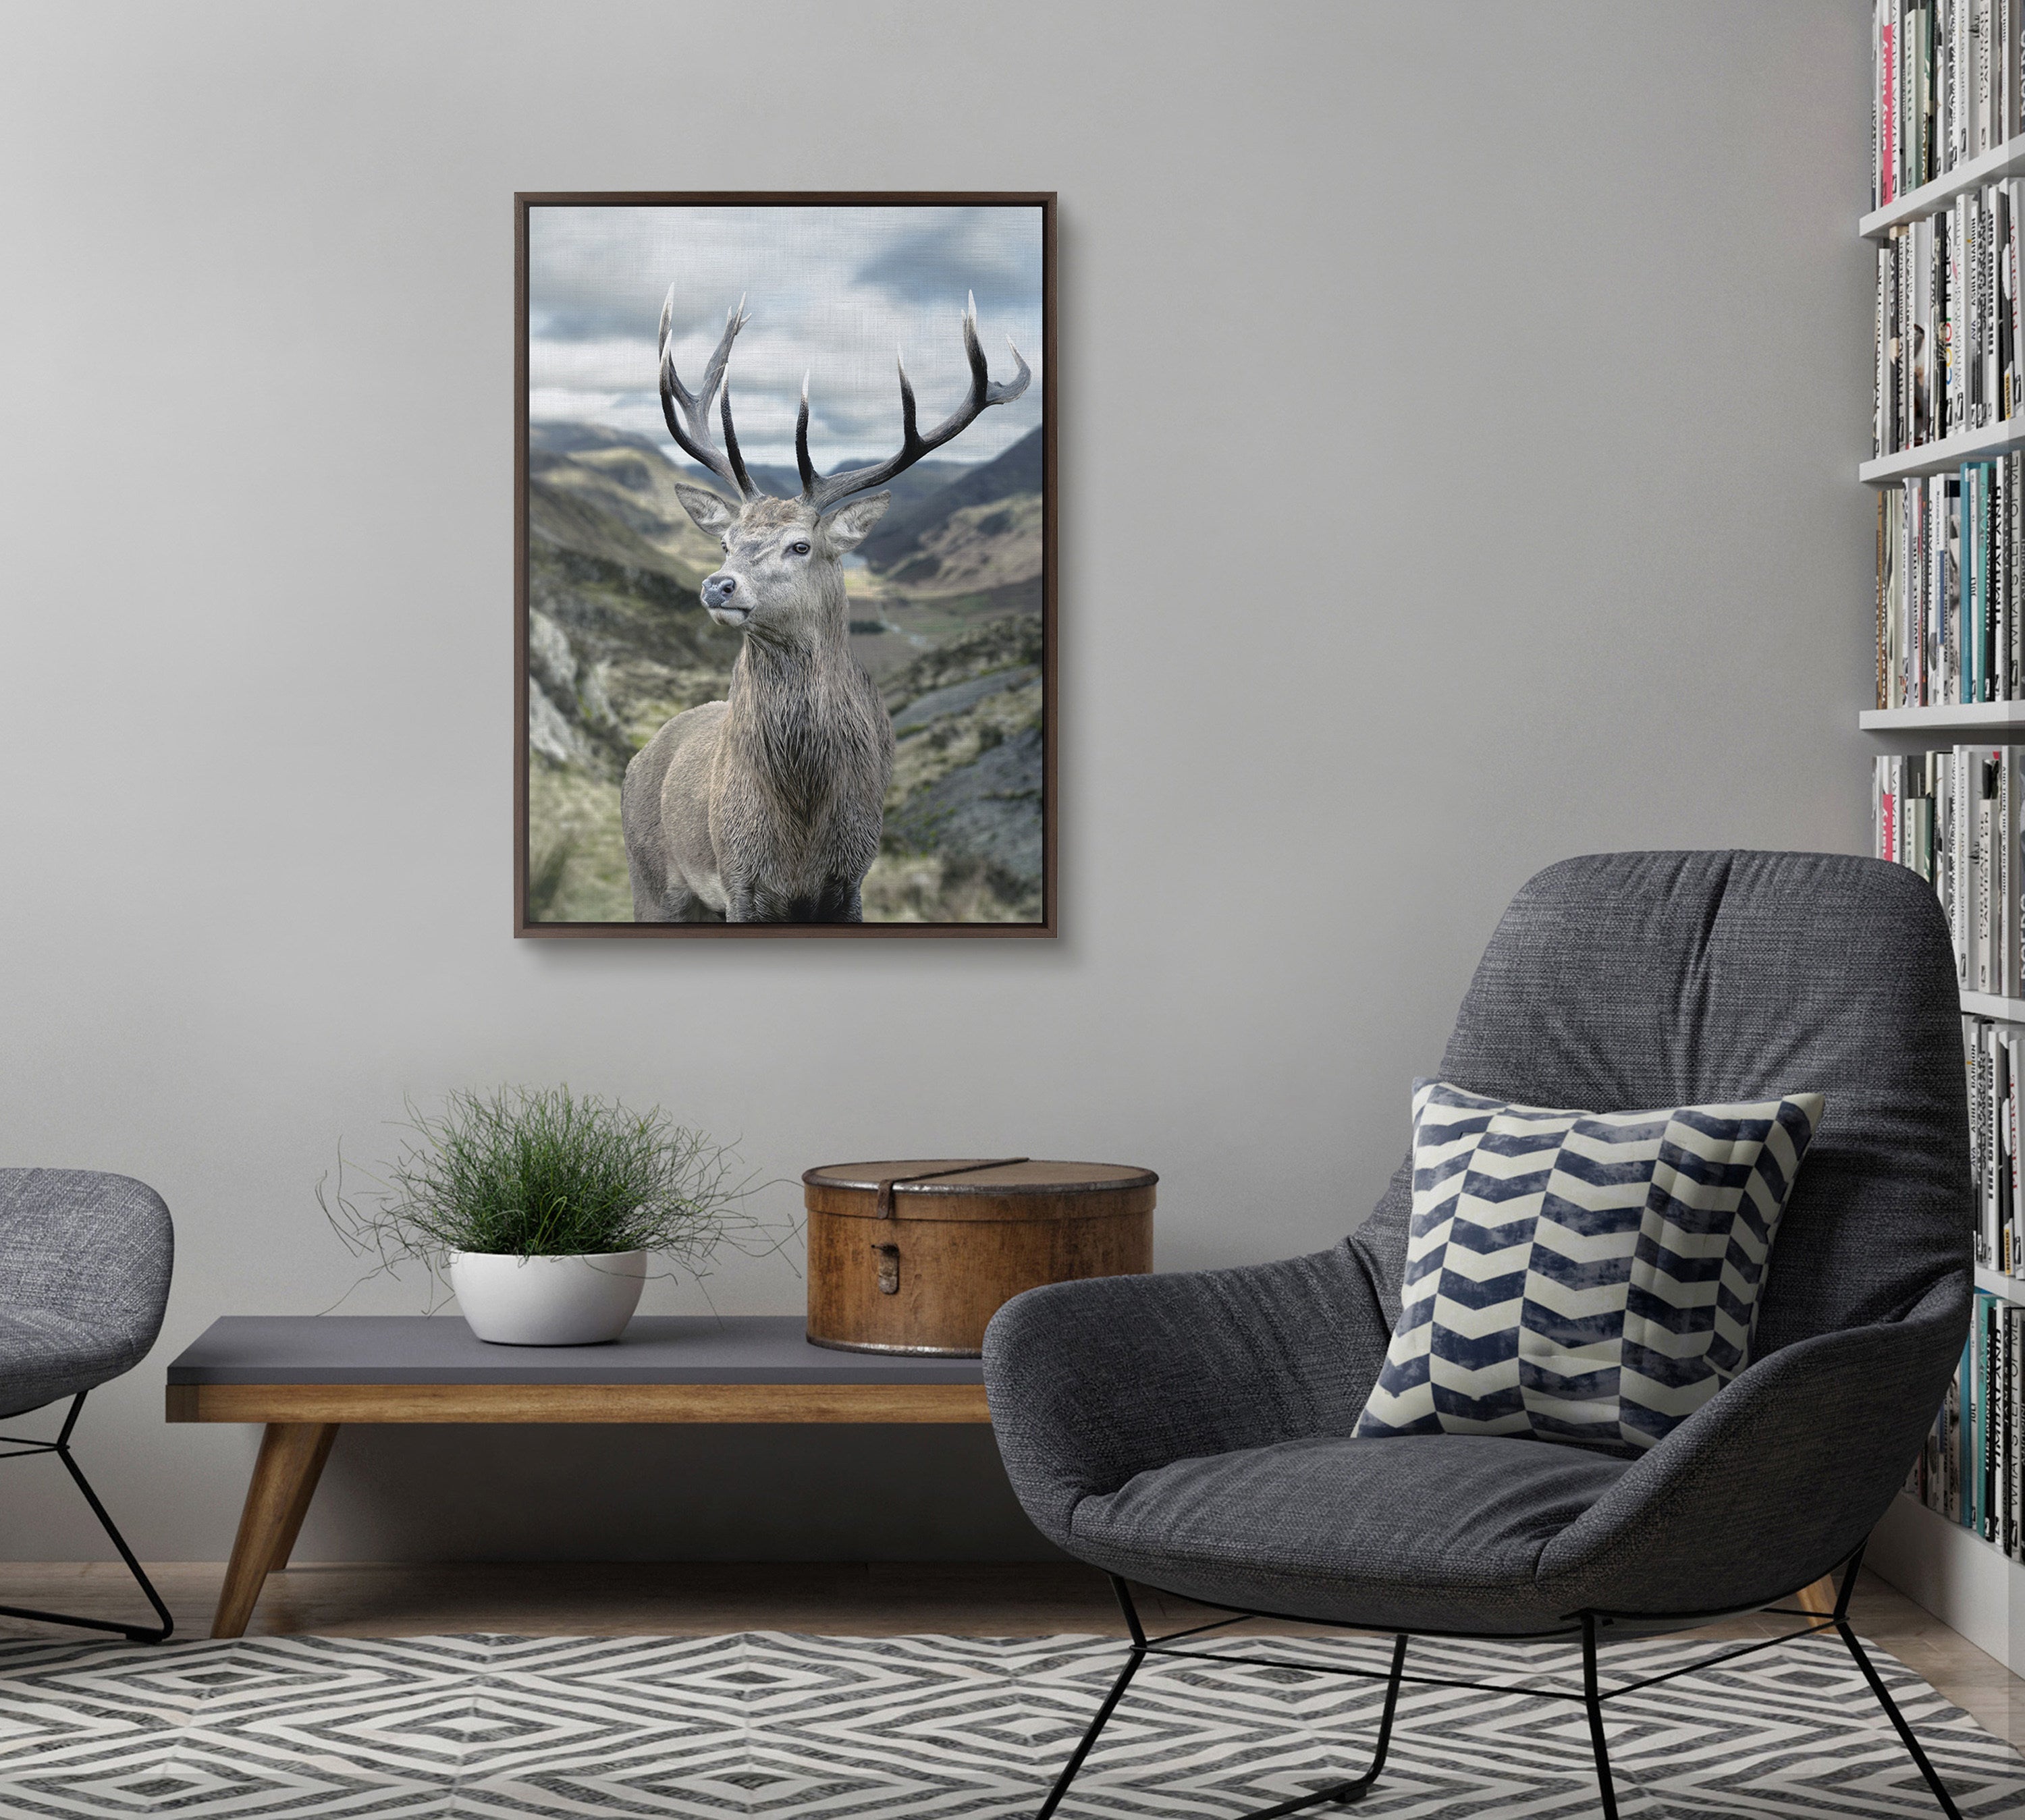 Sylvie Rosebud Deer Portrait with Linen Texture Framed Canvas by The Creative Bunch Studio